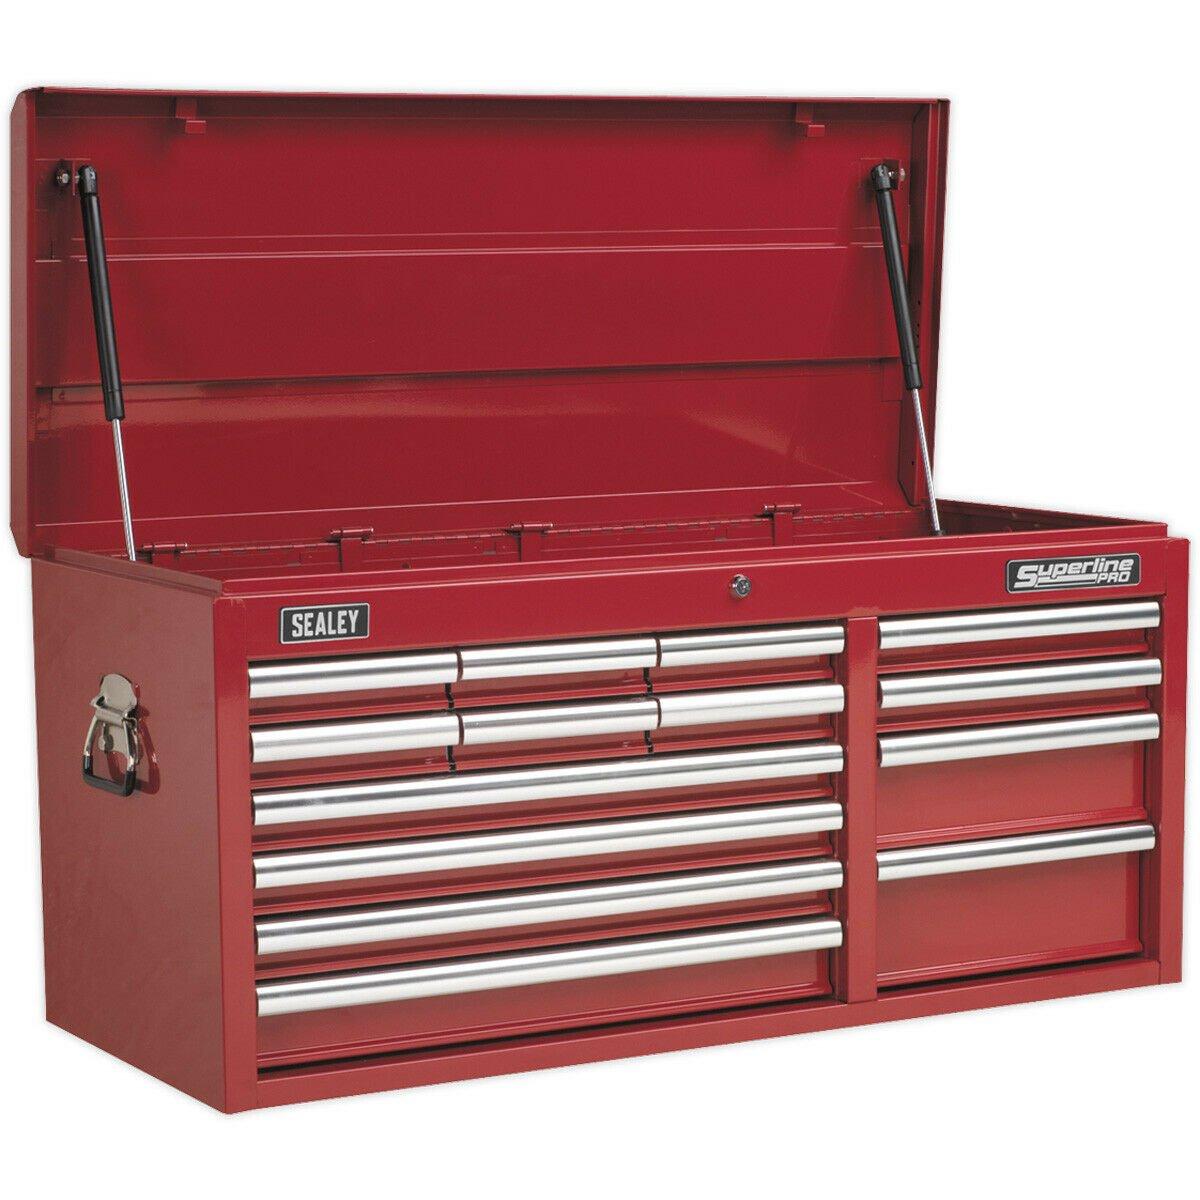 1025 x 435 x 490mm RED 14 Drawer Topchest Tool Chest Lockable Storage Cabinet